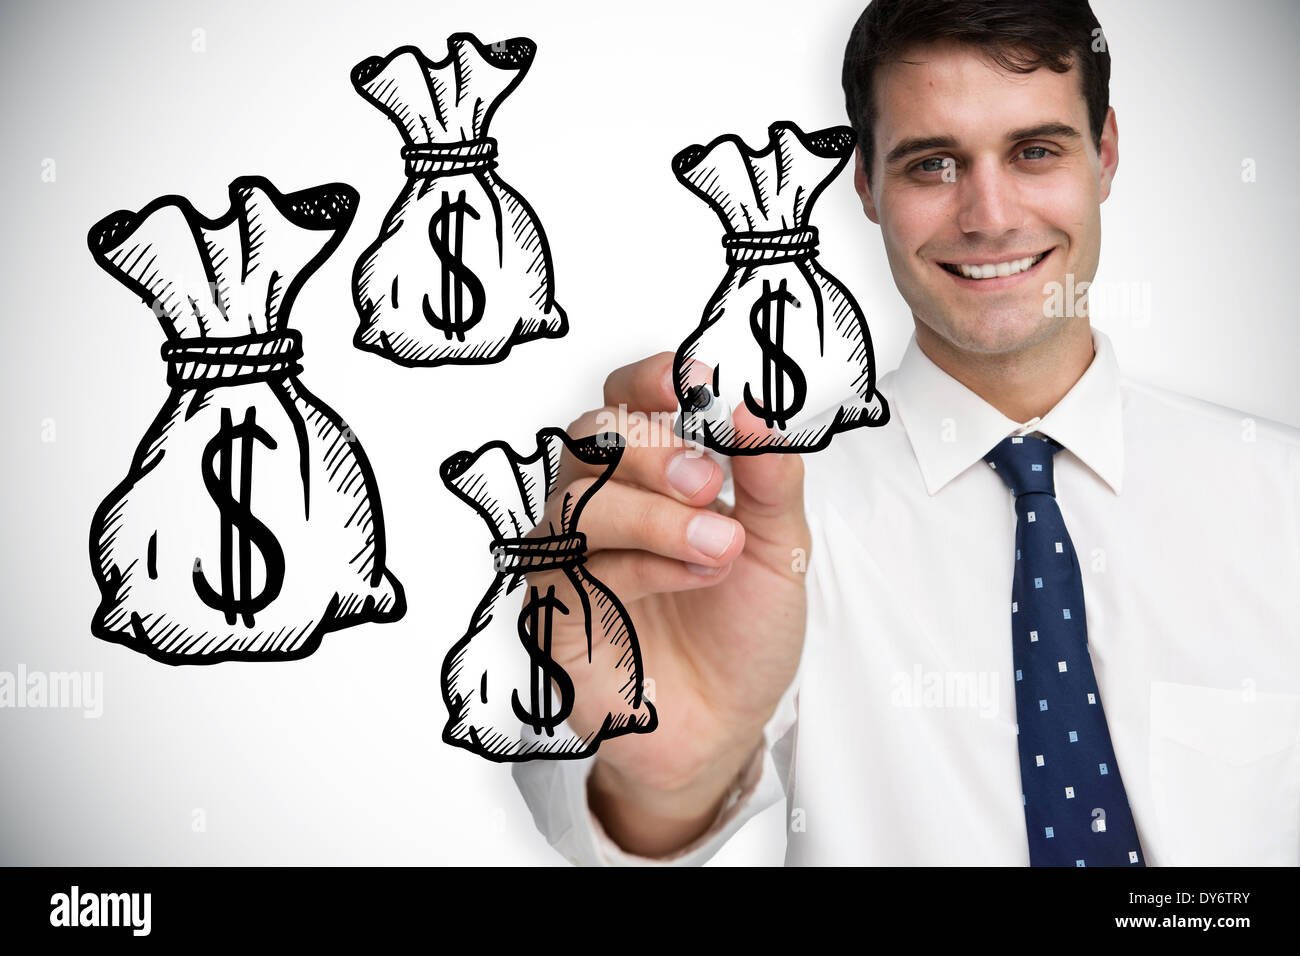 Composite image of businessman drawing money bags Stock Photo